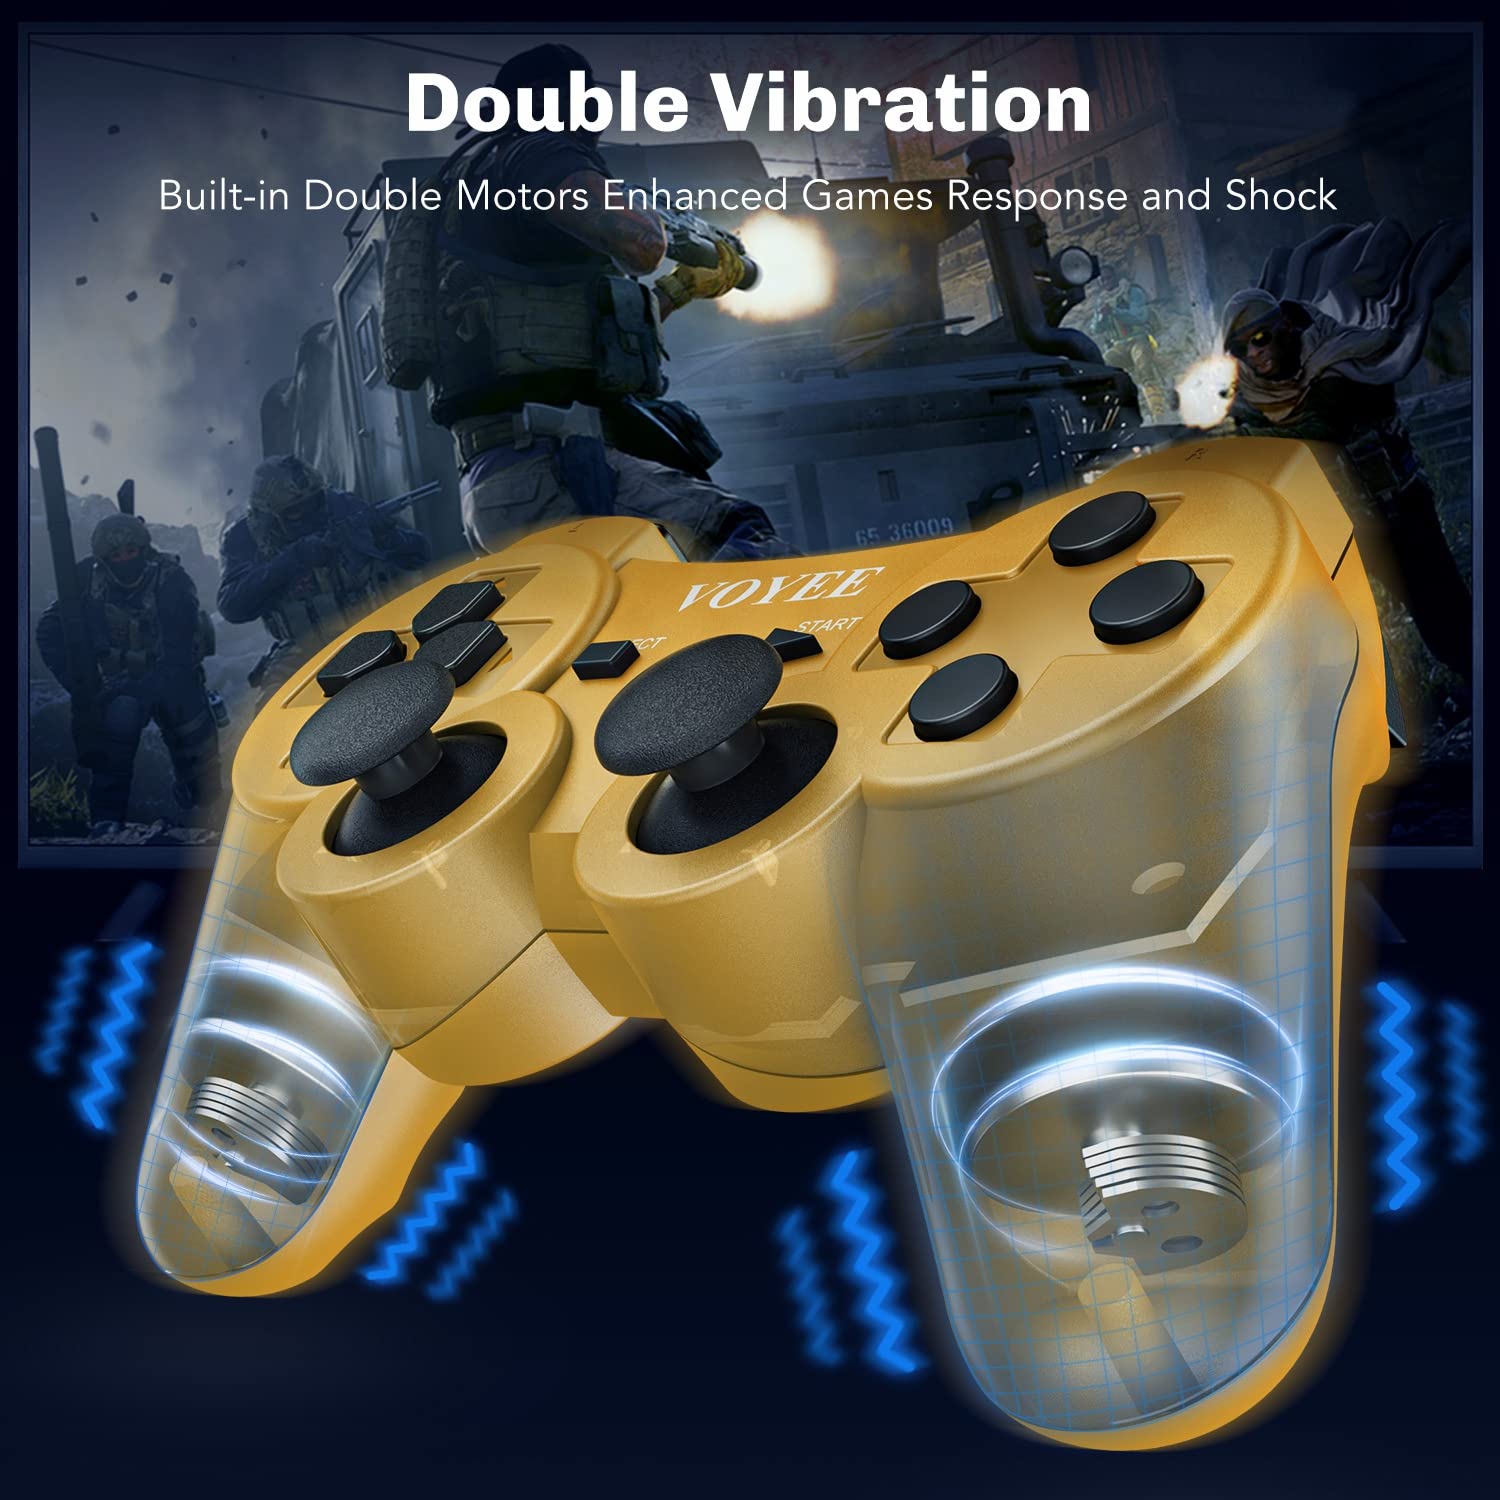 VOYEE Wireless Controller Compatible with Playstation 3 PS-3 Controller with Upgraded Joystick/Rechargerable Battery/Motion Control/Double Shock (Gold)